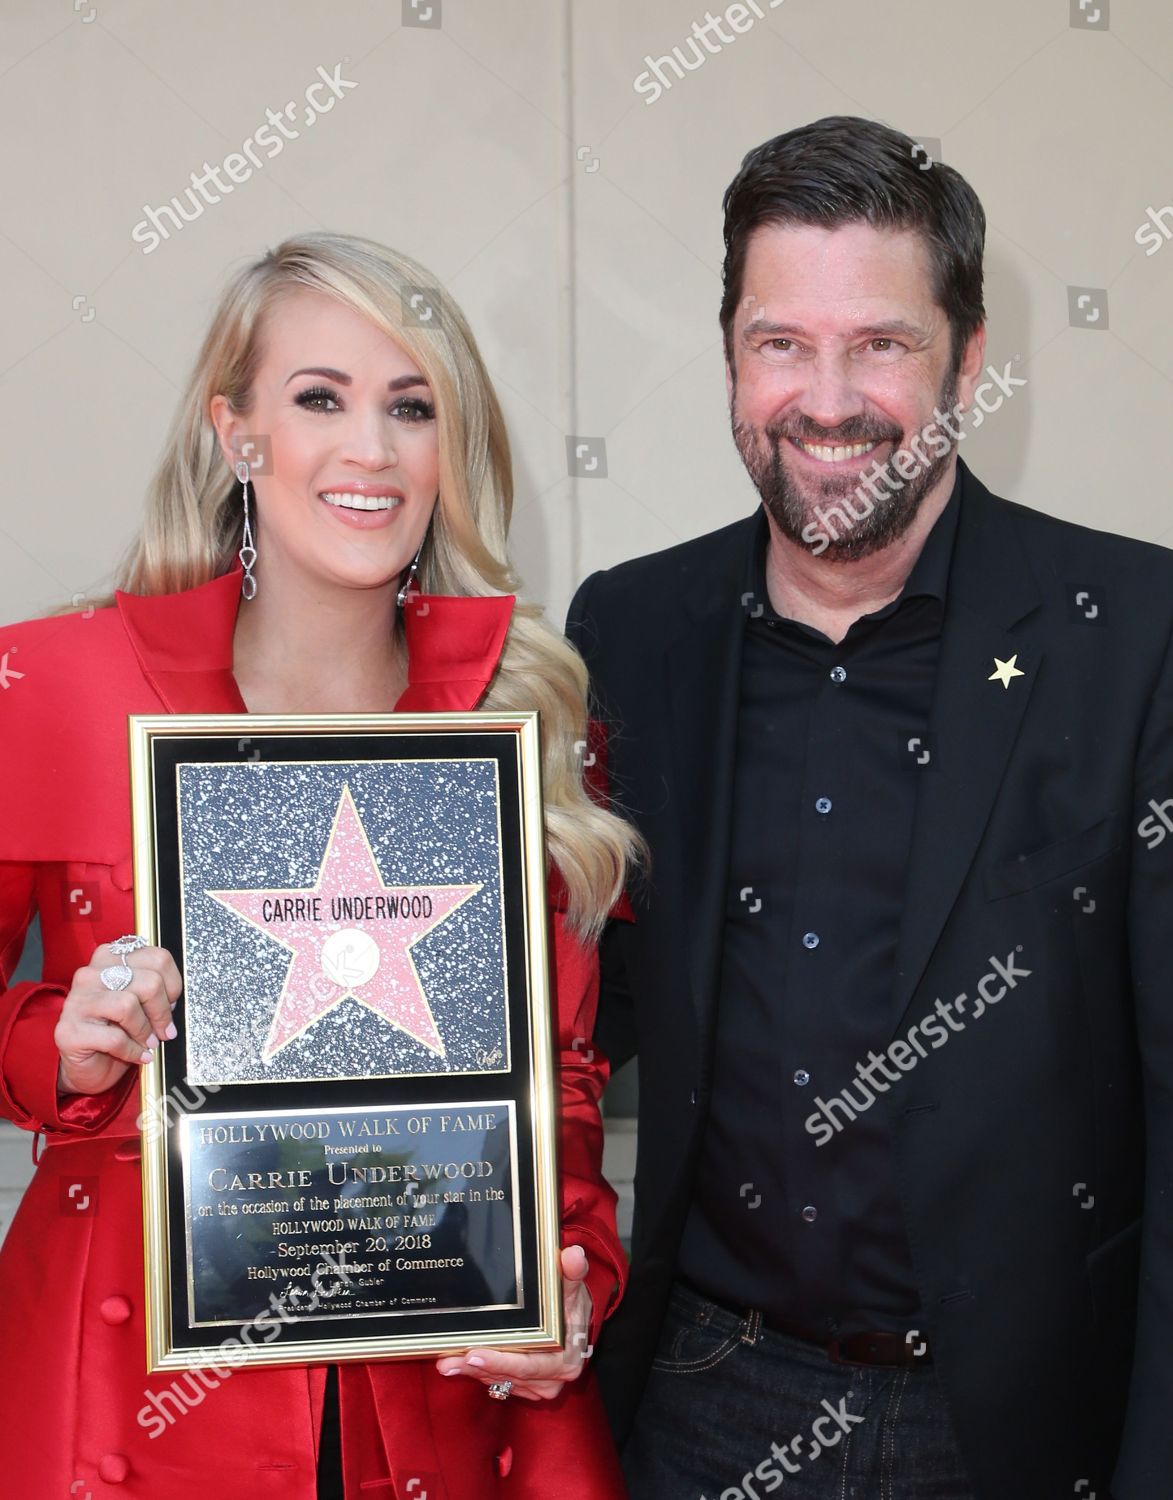 USA - Carrie Underwood Star Ceremony - Los Angeles